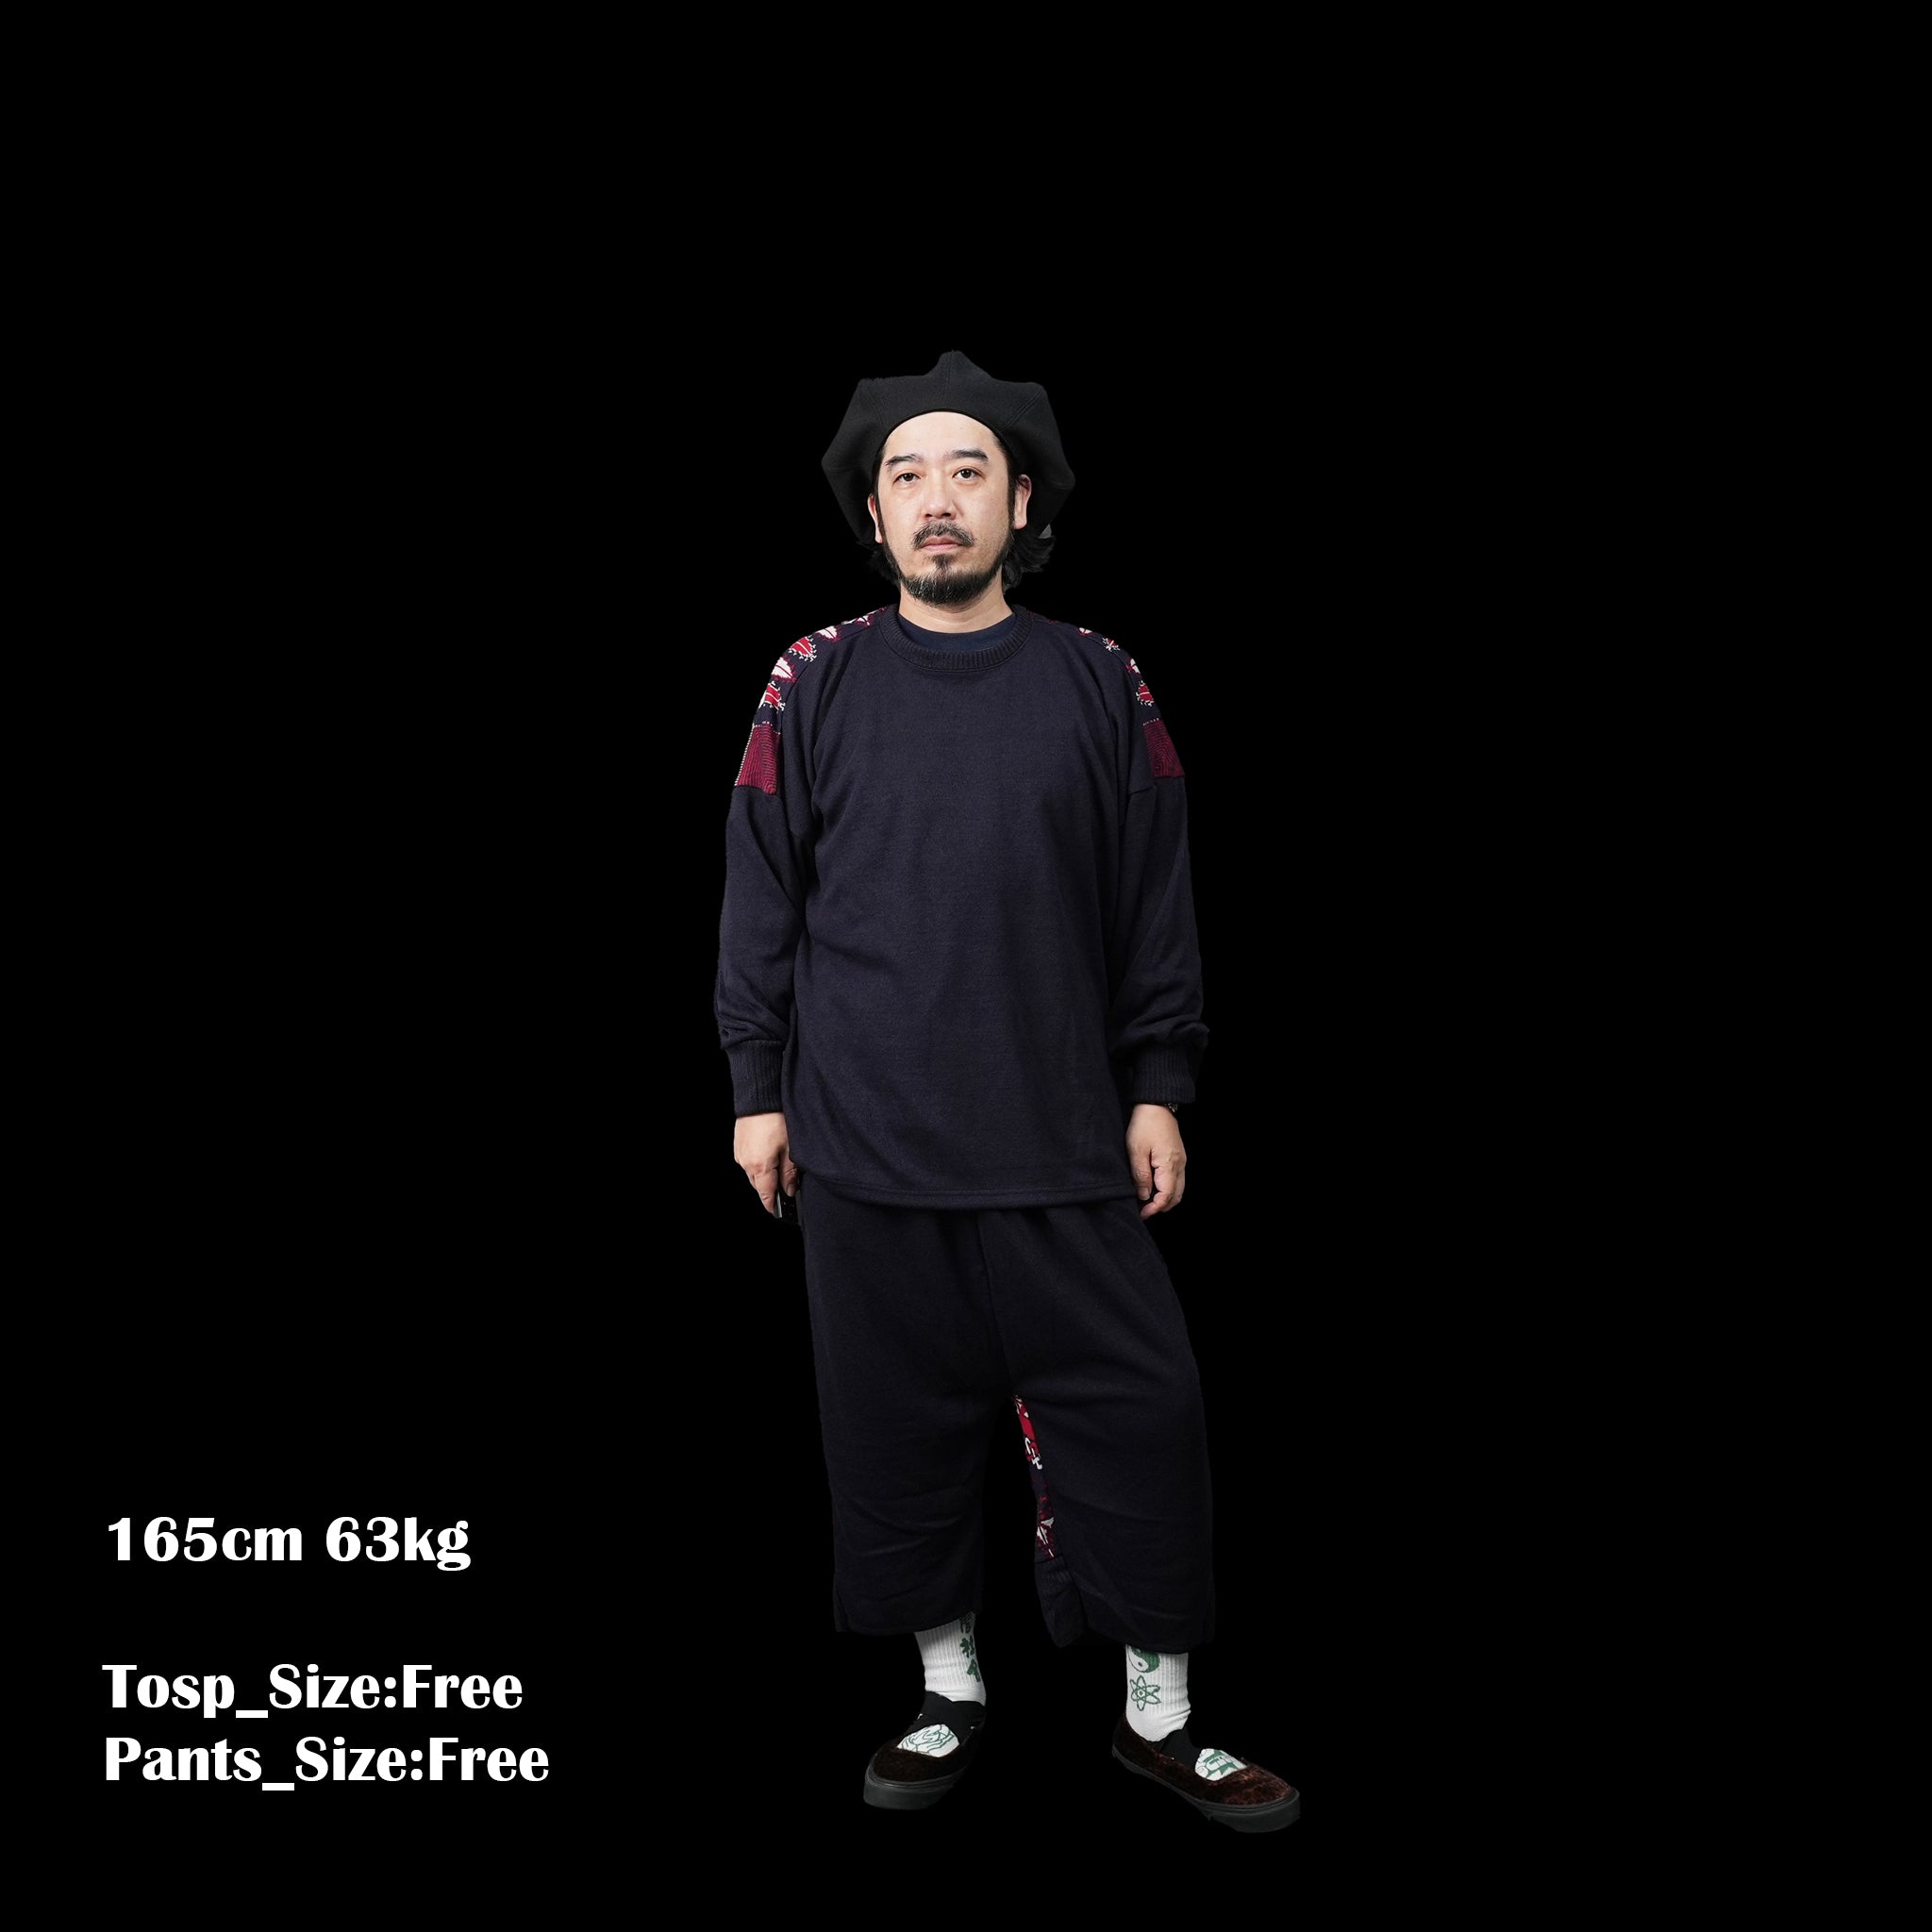 No:SF23AW-23 | Name:Jaquard Relax Pants | Color:Navy【STOF_ストフ】